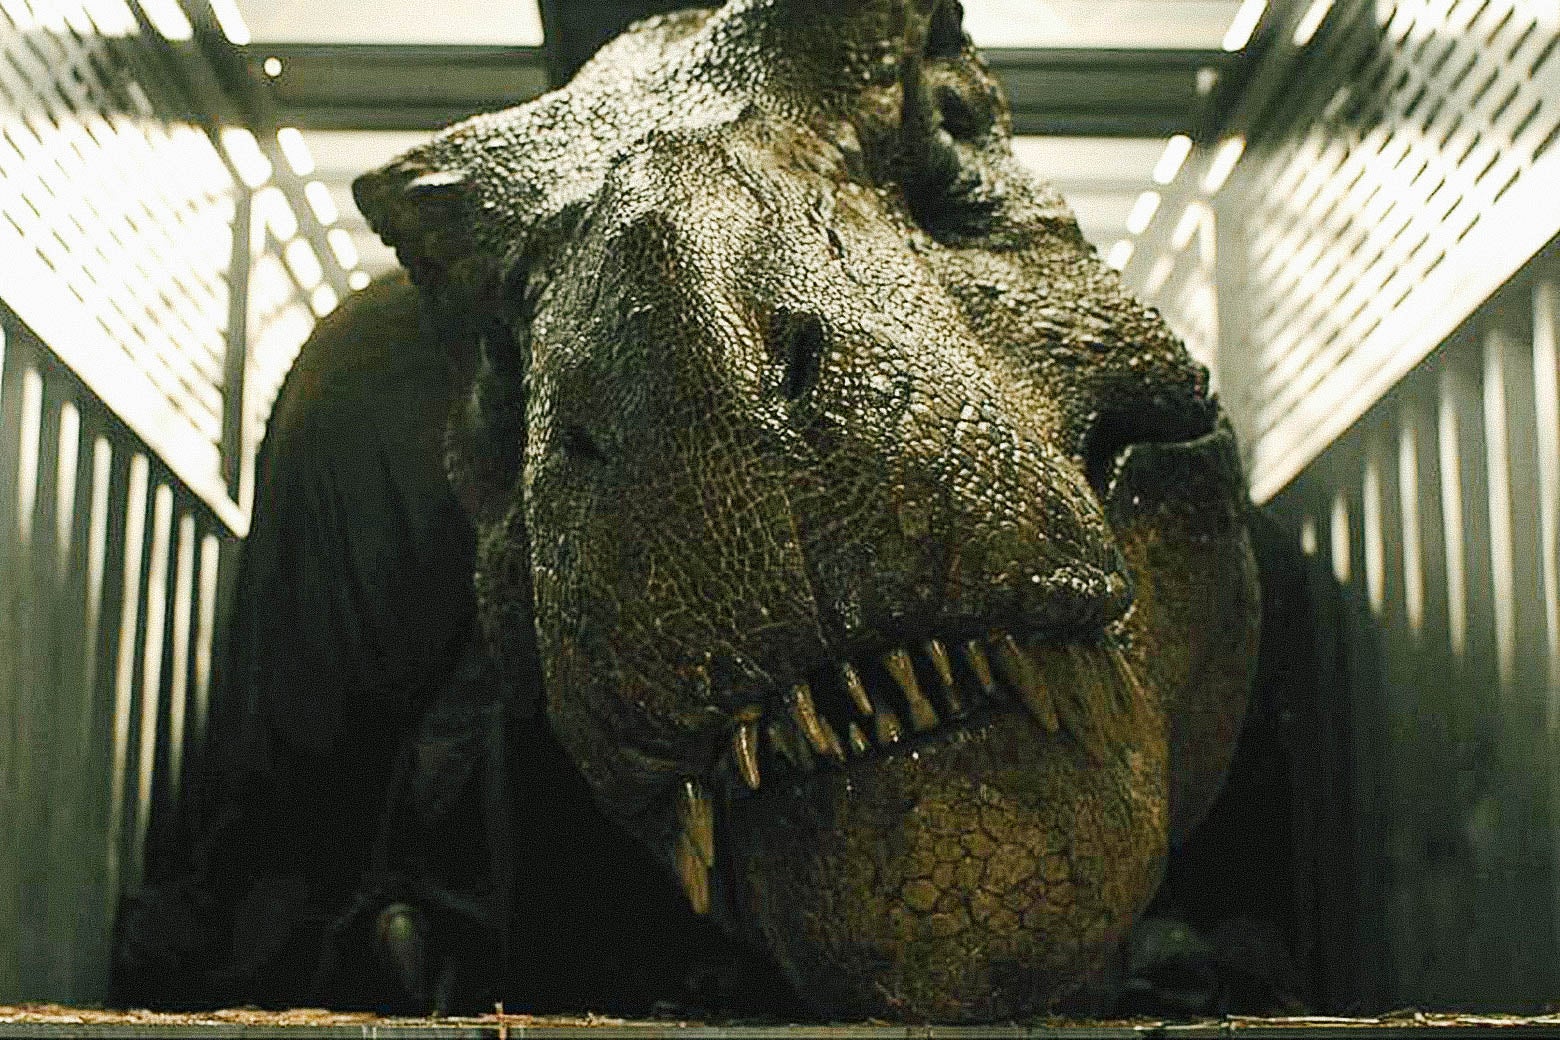 A dinosaur in a large cage.